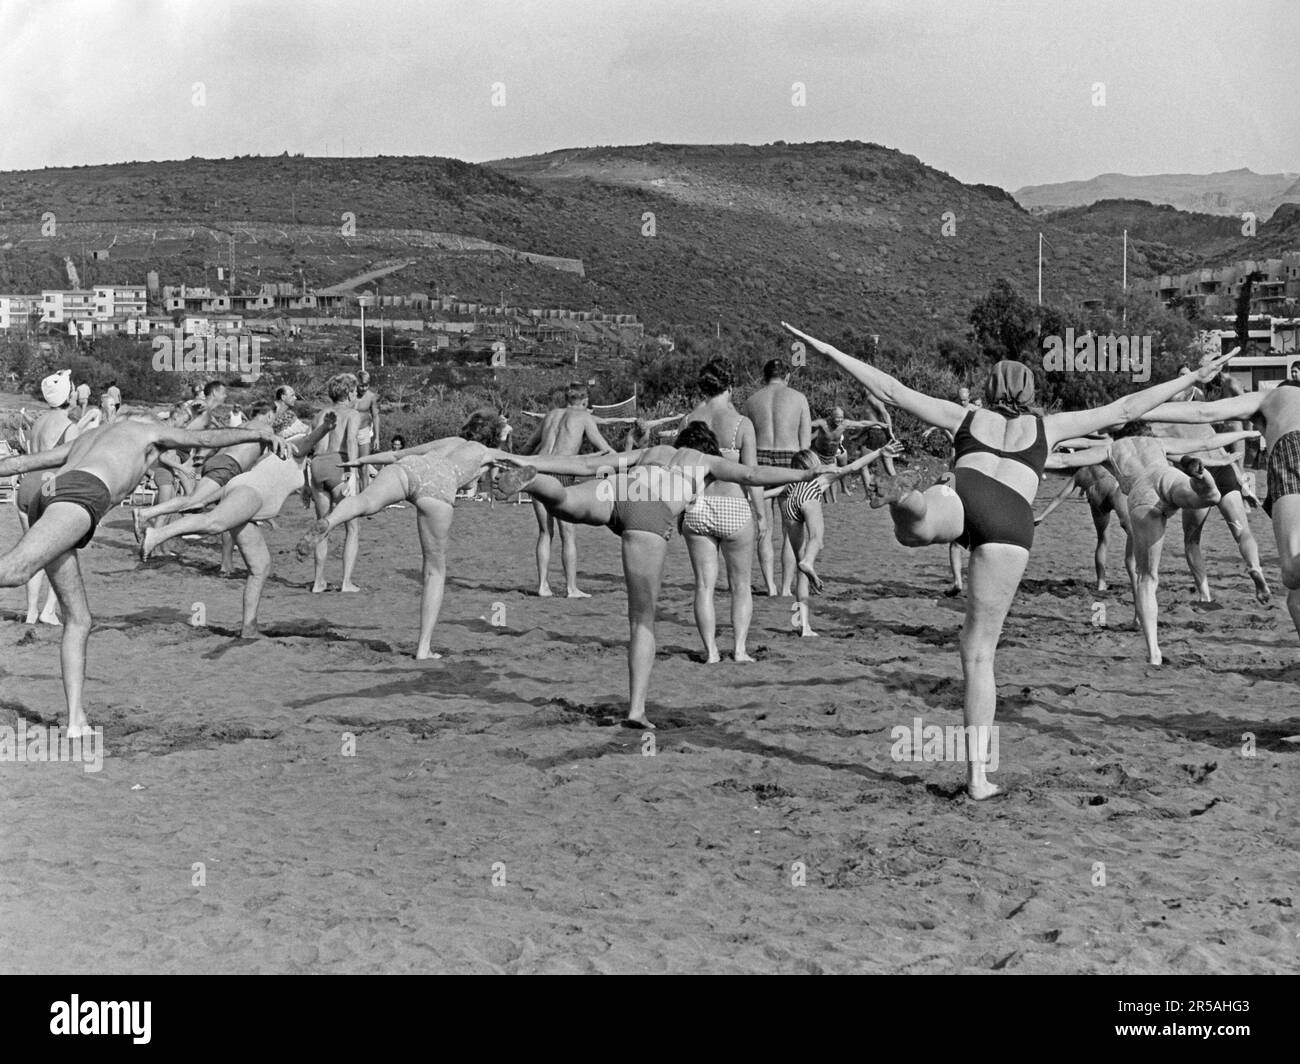 In the 1960s. A group of people are seen exercising on a beach on the Canary islands. There on holiday they join the activities like this one. 1965 Stock Photo